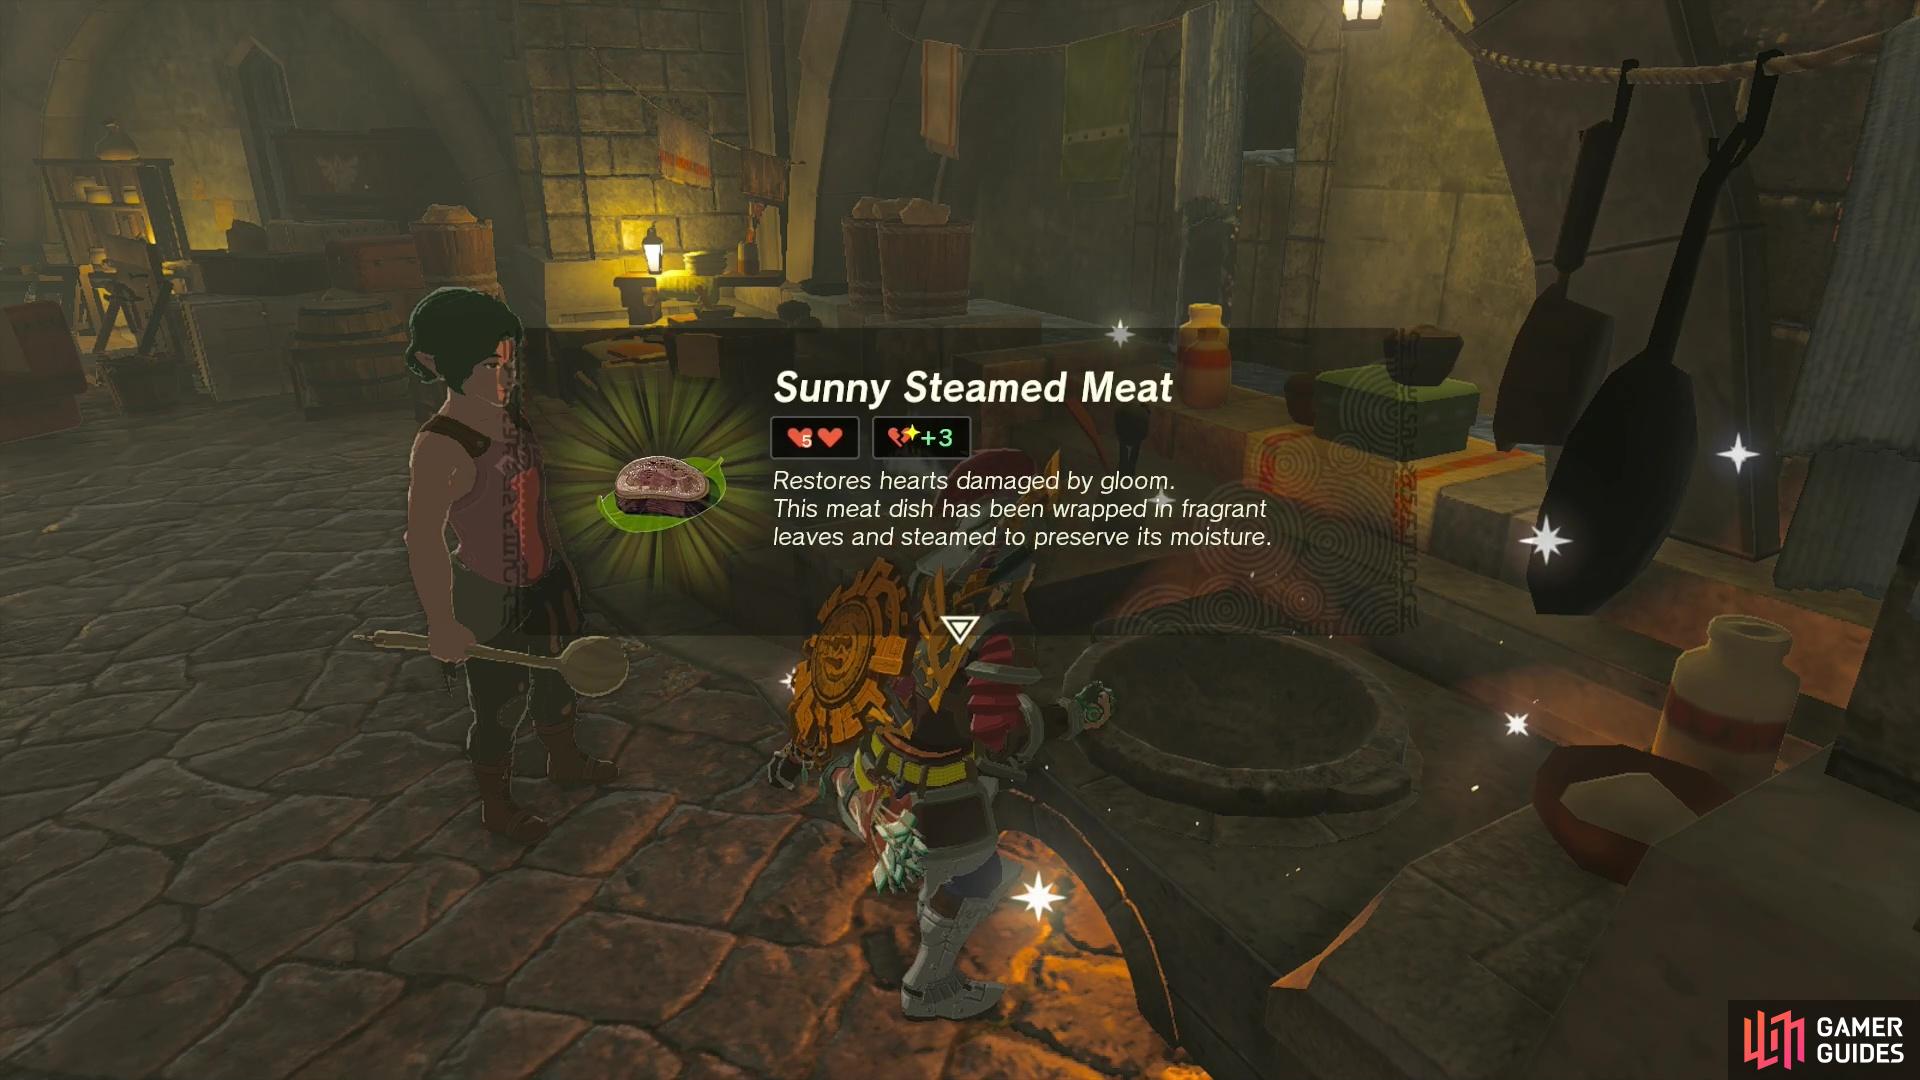 Sunny foods are your best friend in this fight!